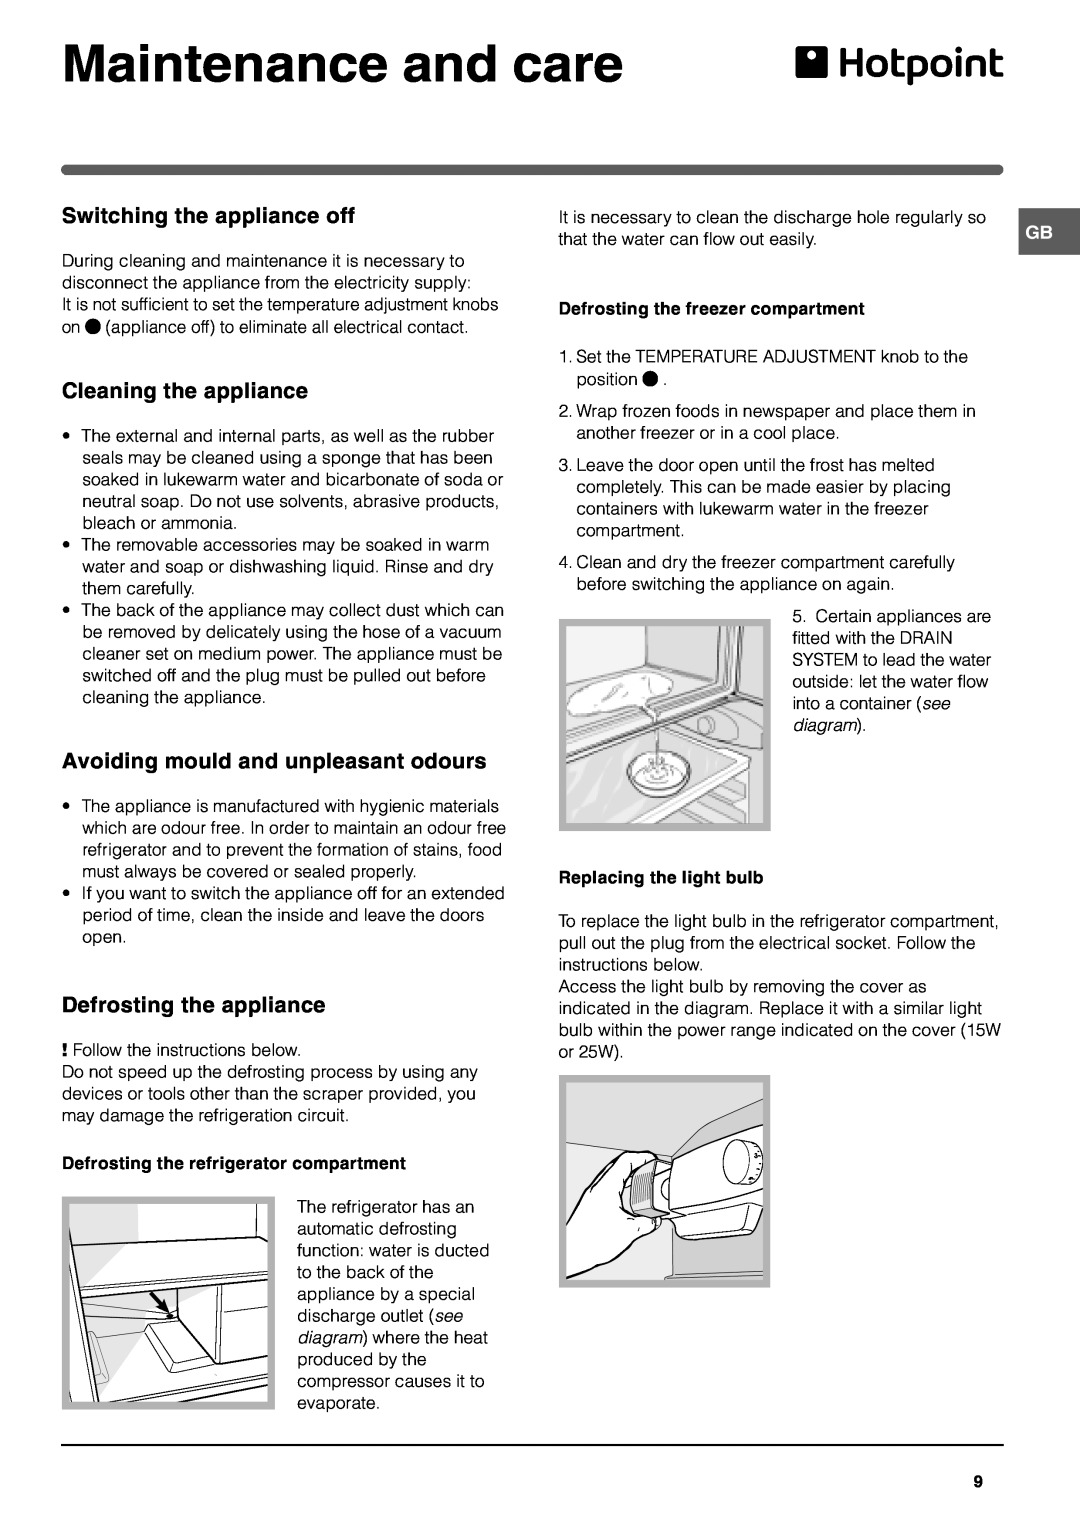 Hotpoint HT303NI manual Maintenance and care, Switching the appliance off, Cleaning the appliance, Defrosting the appliance 